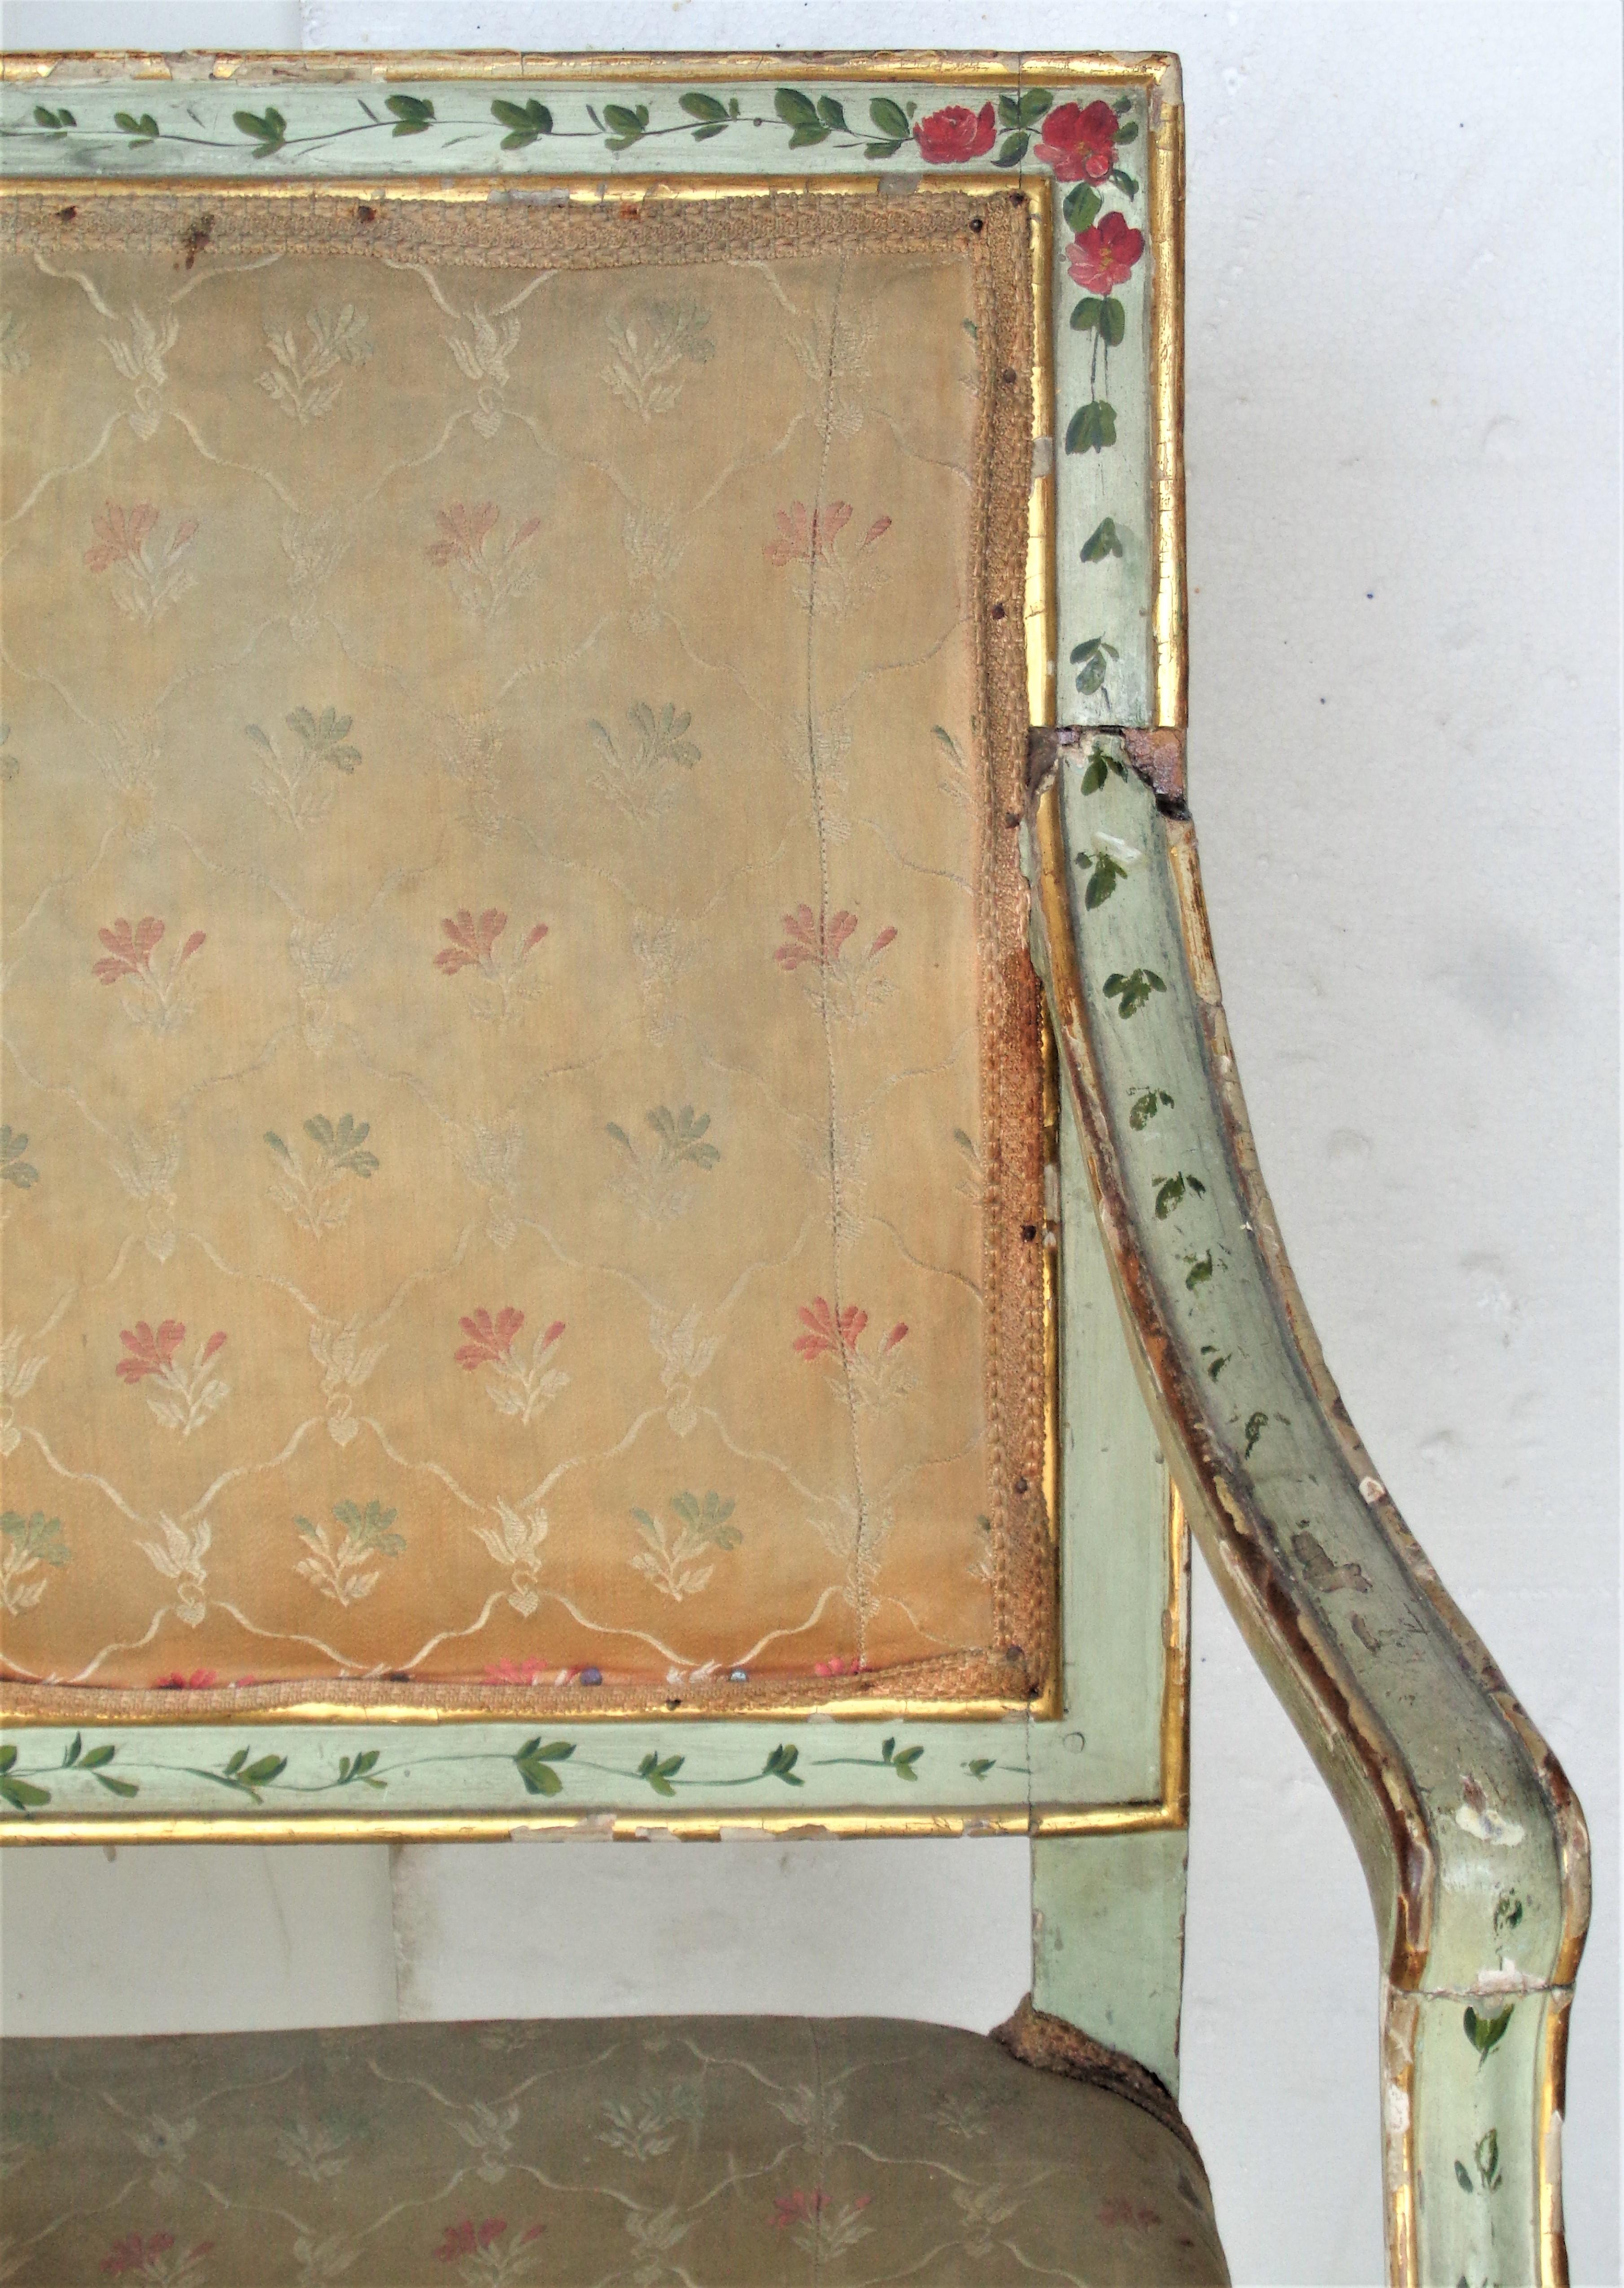 `Antique 18th century Venetian settee in beautifully aged old painted and worn parcel gilded surface. Early construction. Losses to gilding showing underlying gesso and bare wood. Pale green paint on front and blue green paint on rear are original.